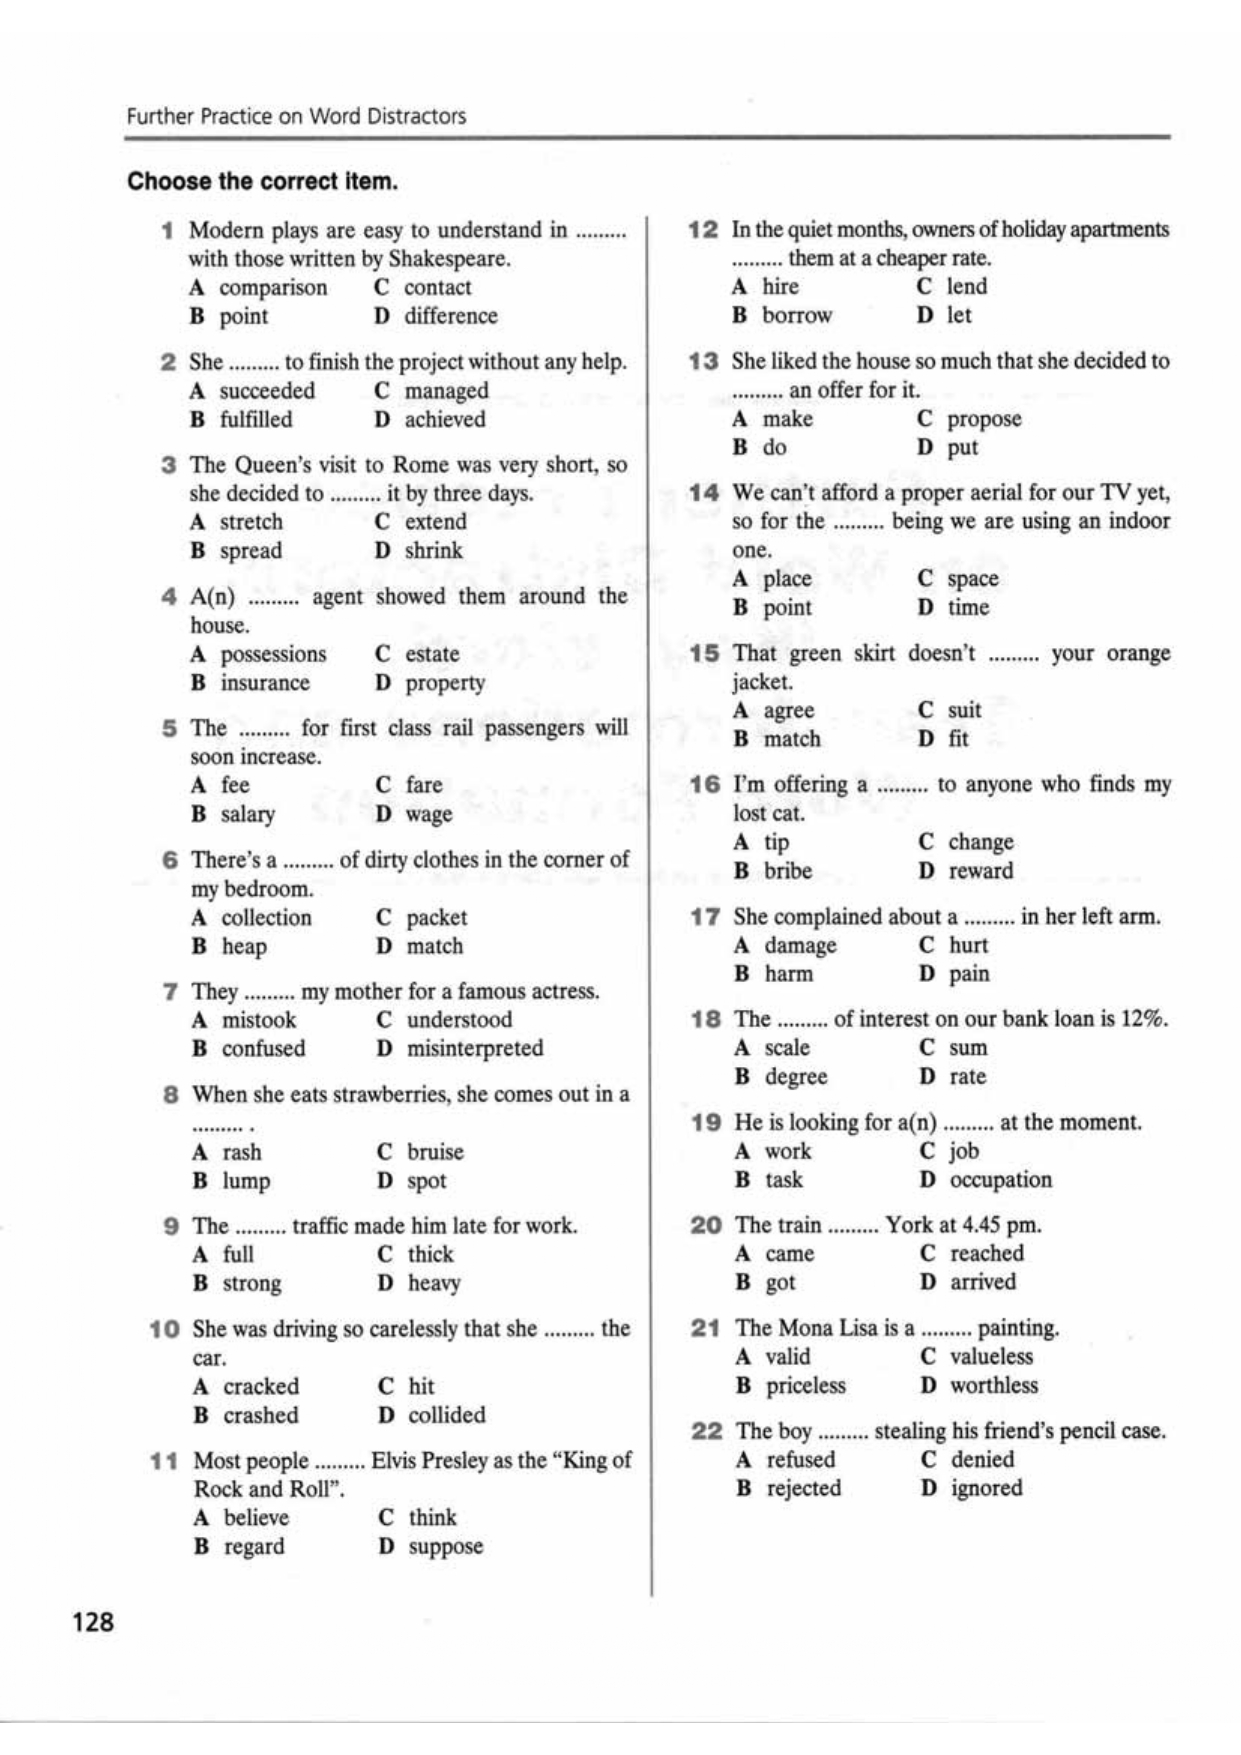 [tailieudieuky.com] Futher Practice on Word Distrators, Key word transformations and Word Formatio - Level B2 - with key_page-0002